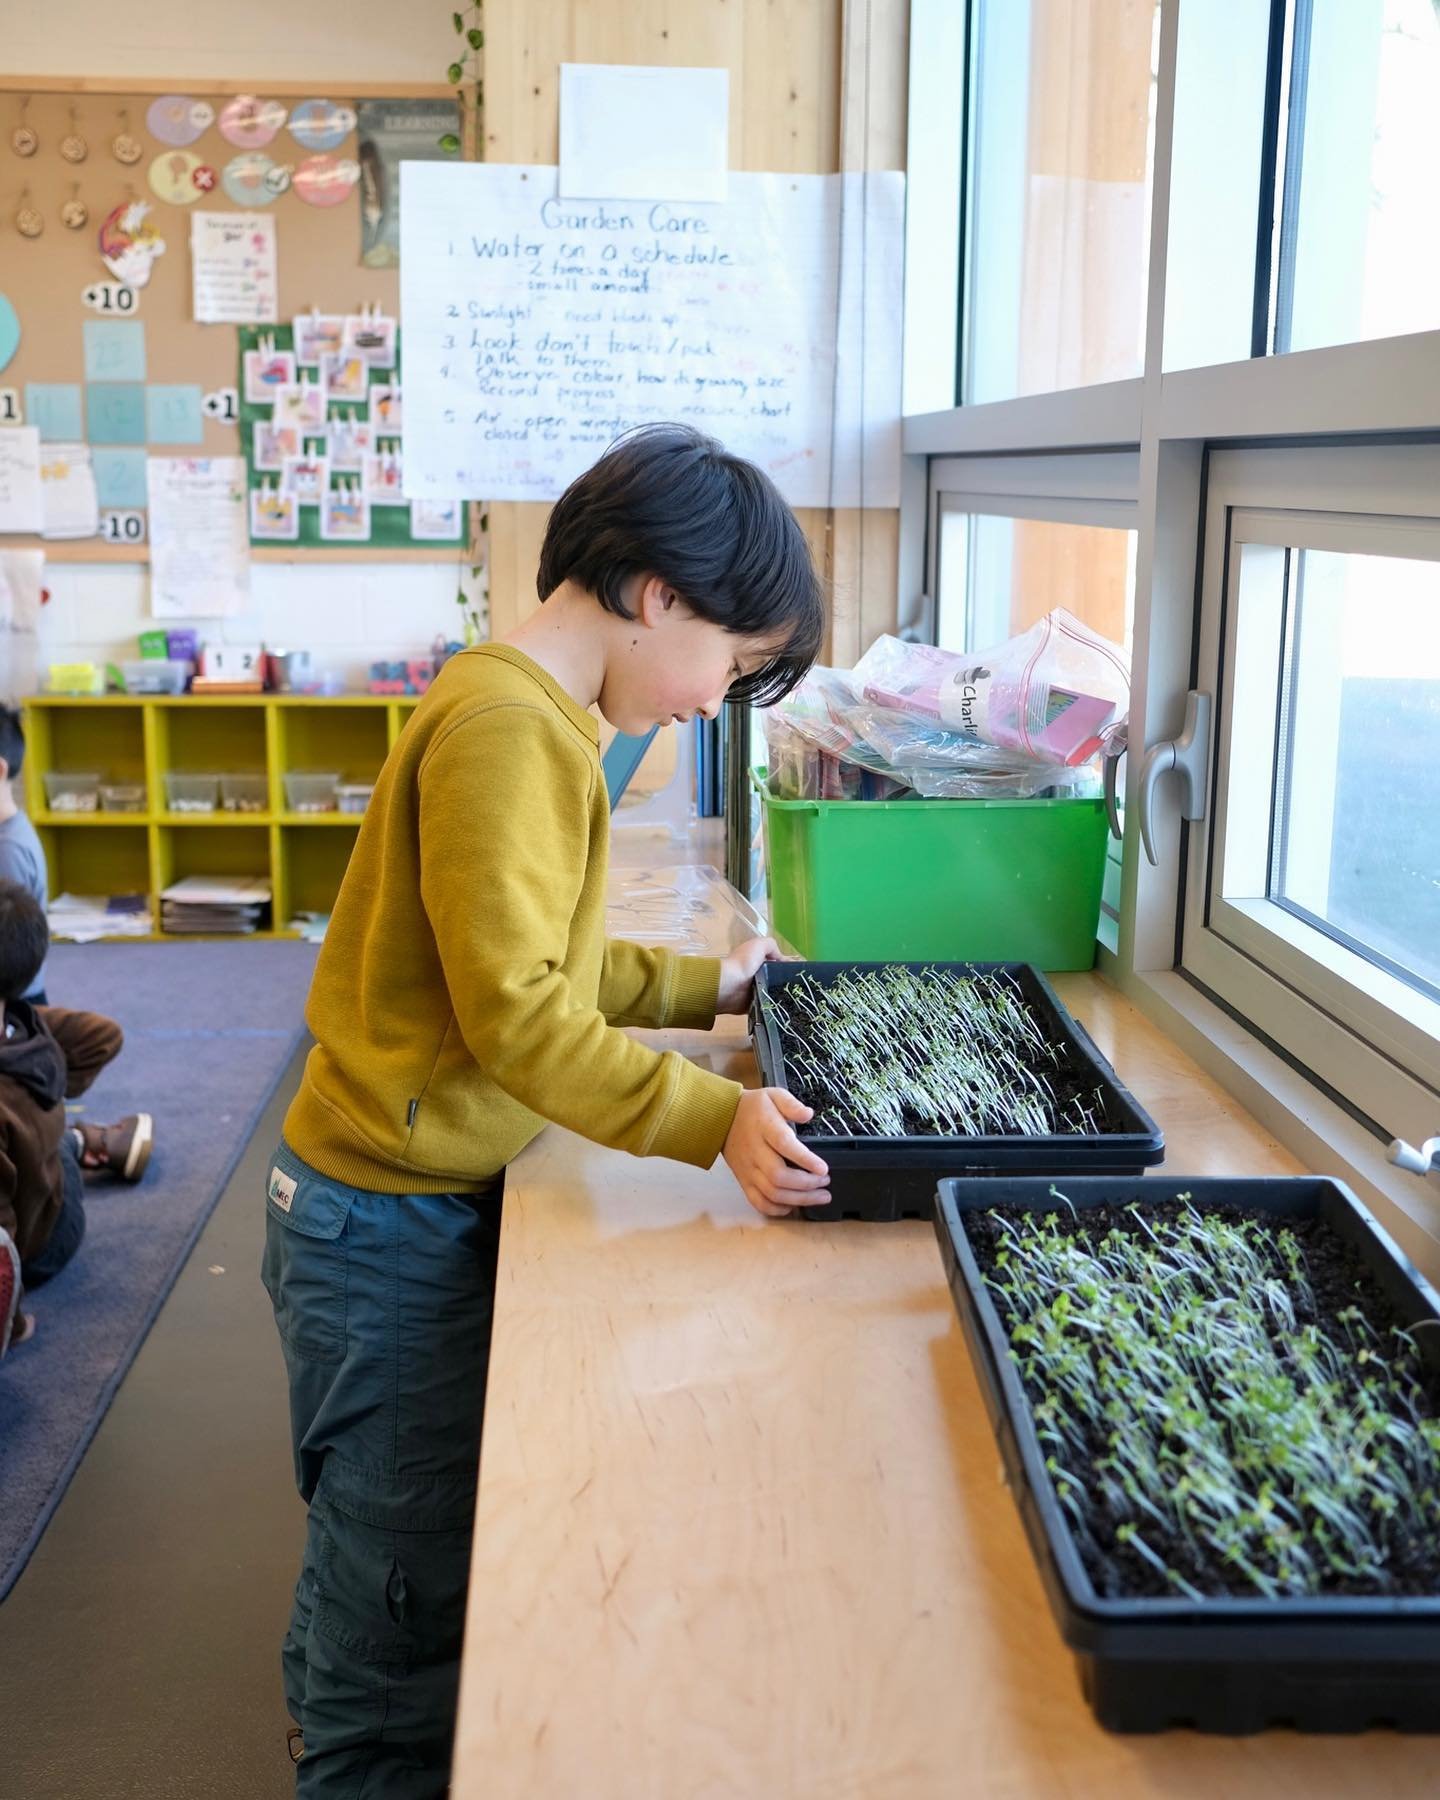 Can you believe it&rsquo;s only been one week since we planted lettuce and mesclun seeds, and this classroom is already seeing sprouts? 🤗🌱

We began week two of our Classroom Programs with our Class Crunch&mdash;checking in on our planting beds!